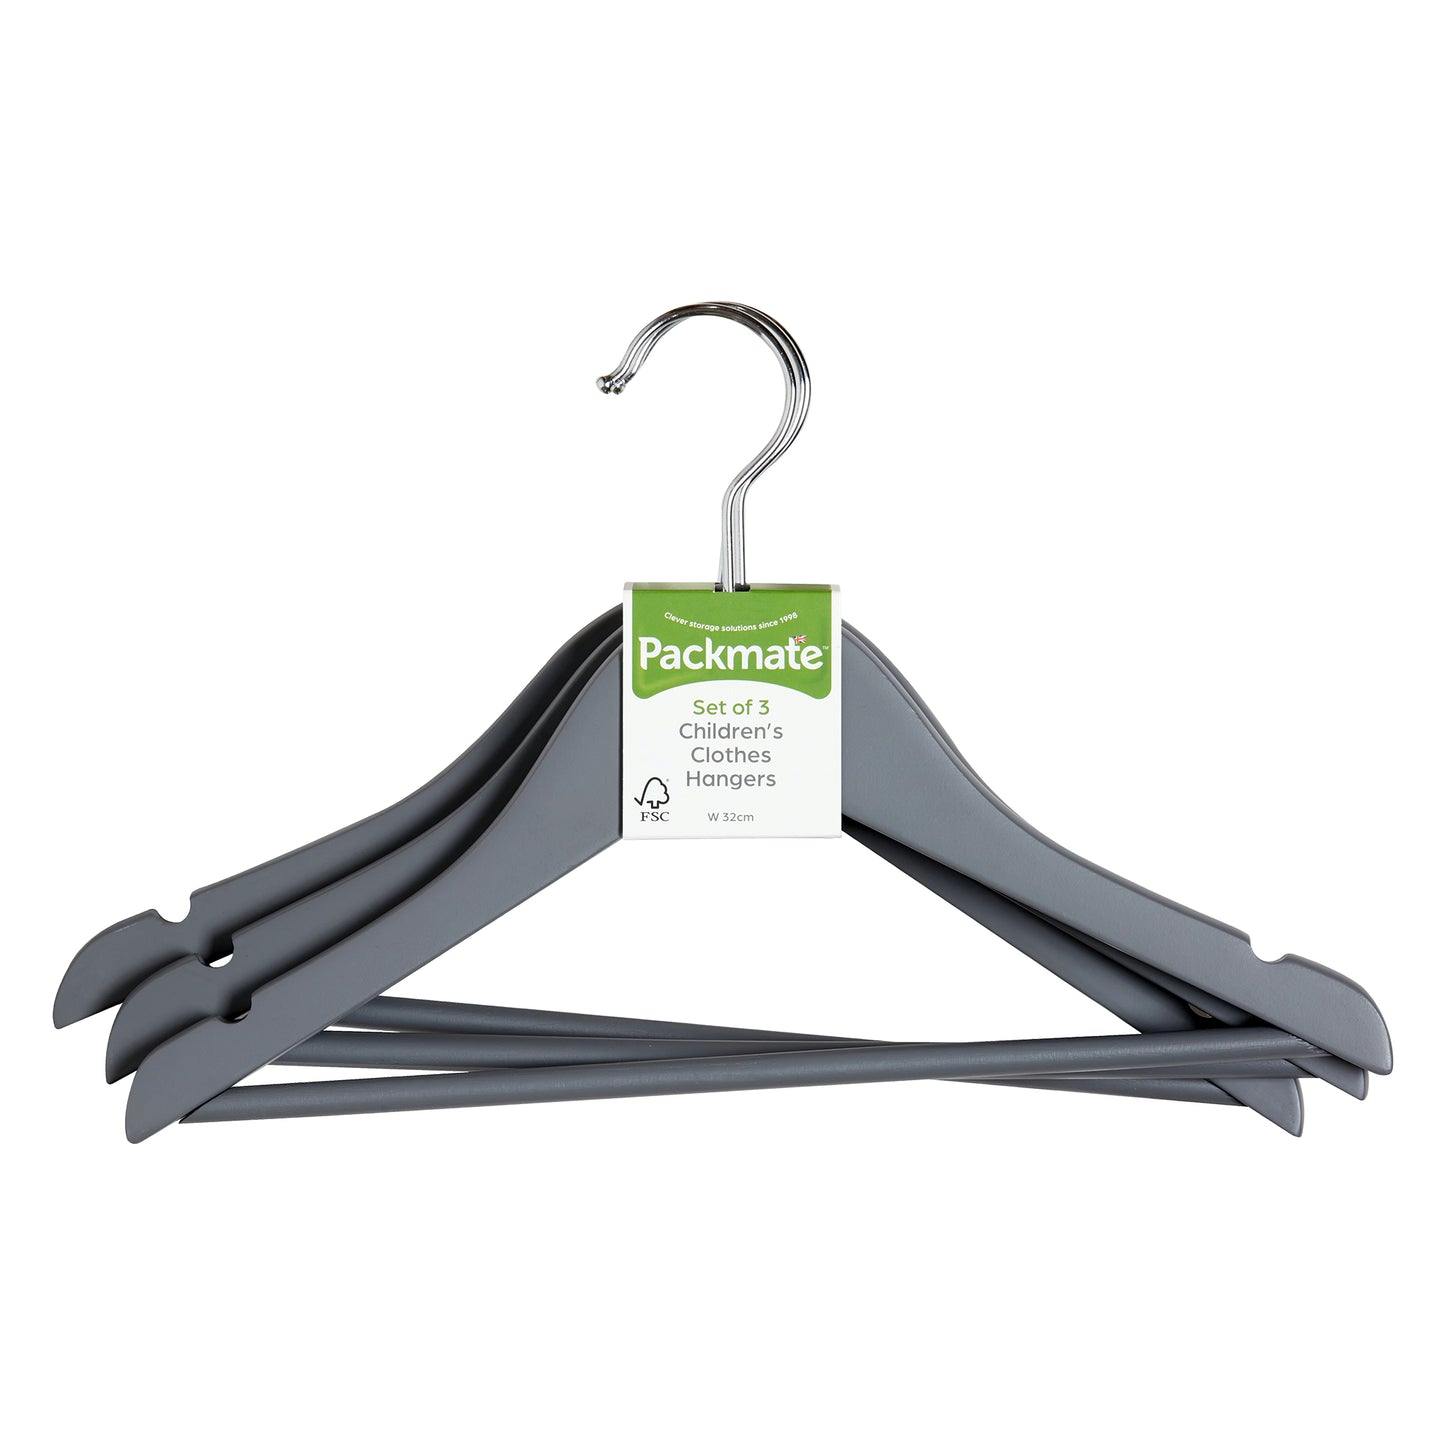 Packmate Set of 3 Children's Wooden Clothes Hangers